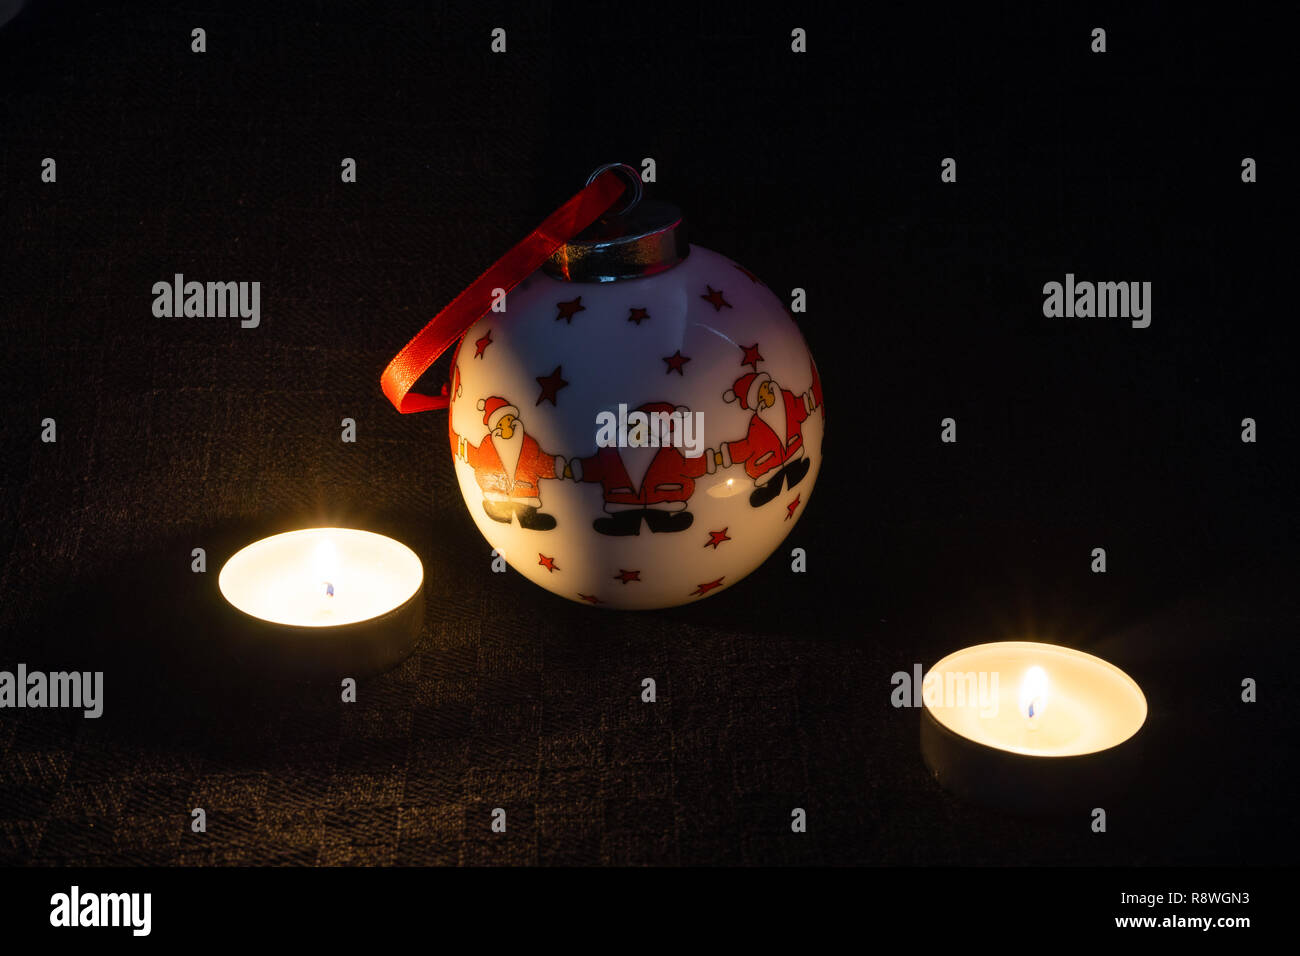 A decorative Christmas bauble depicting three Santa Clauses with two lit candles next to it against black background- Christmas concept Stock Photo